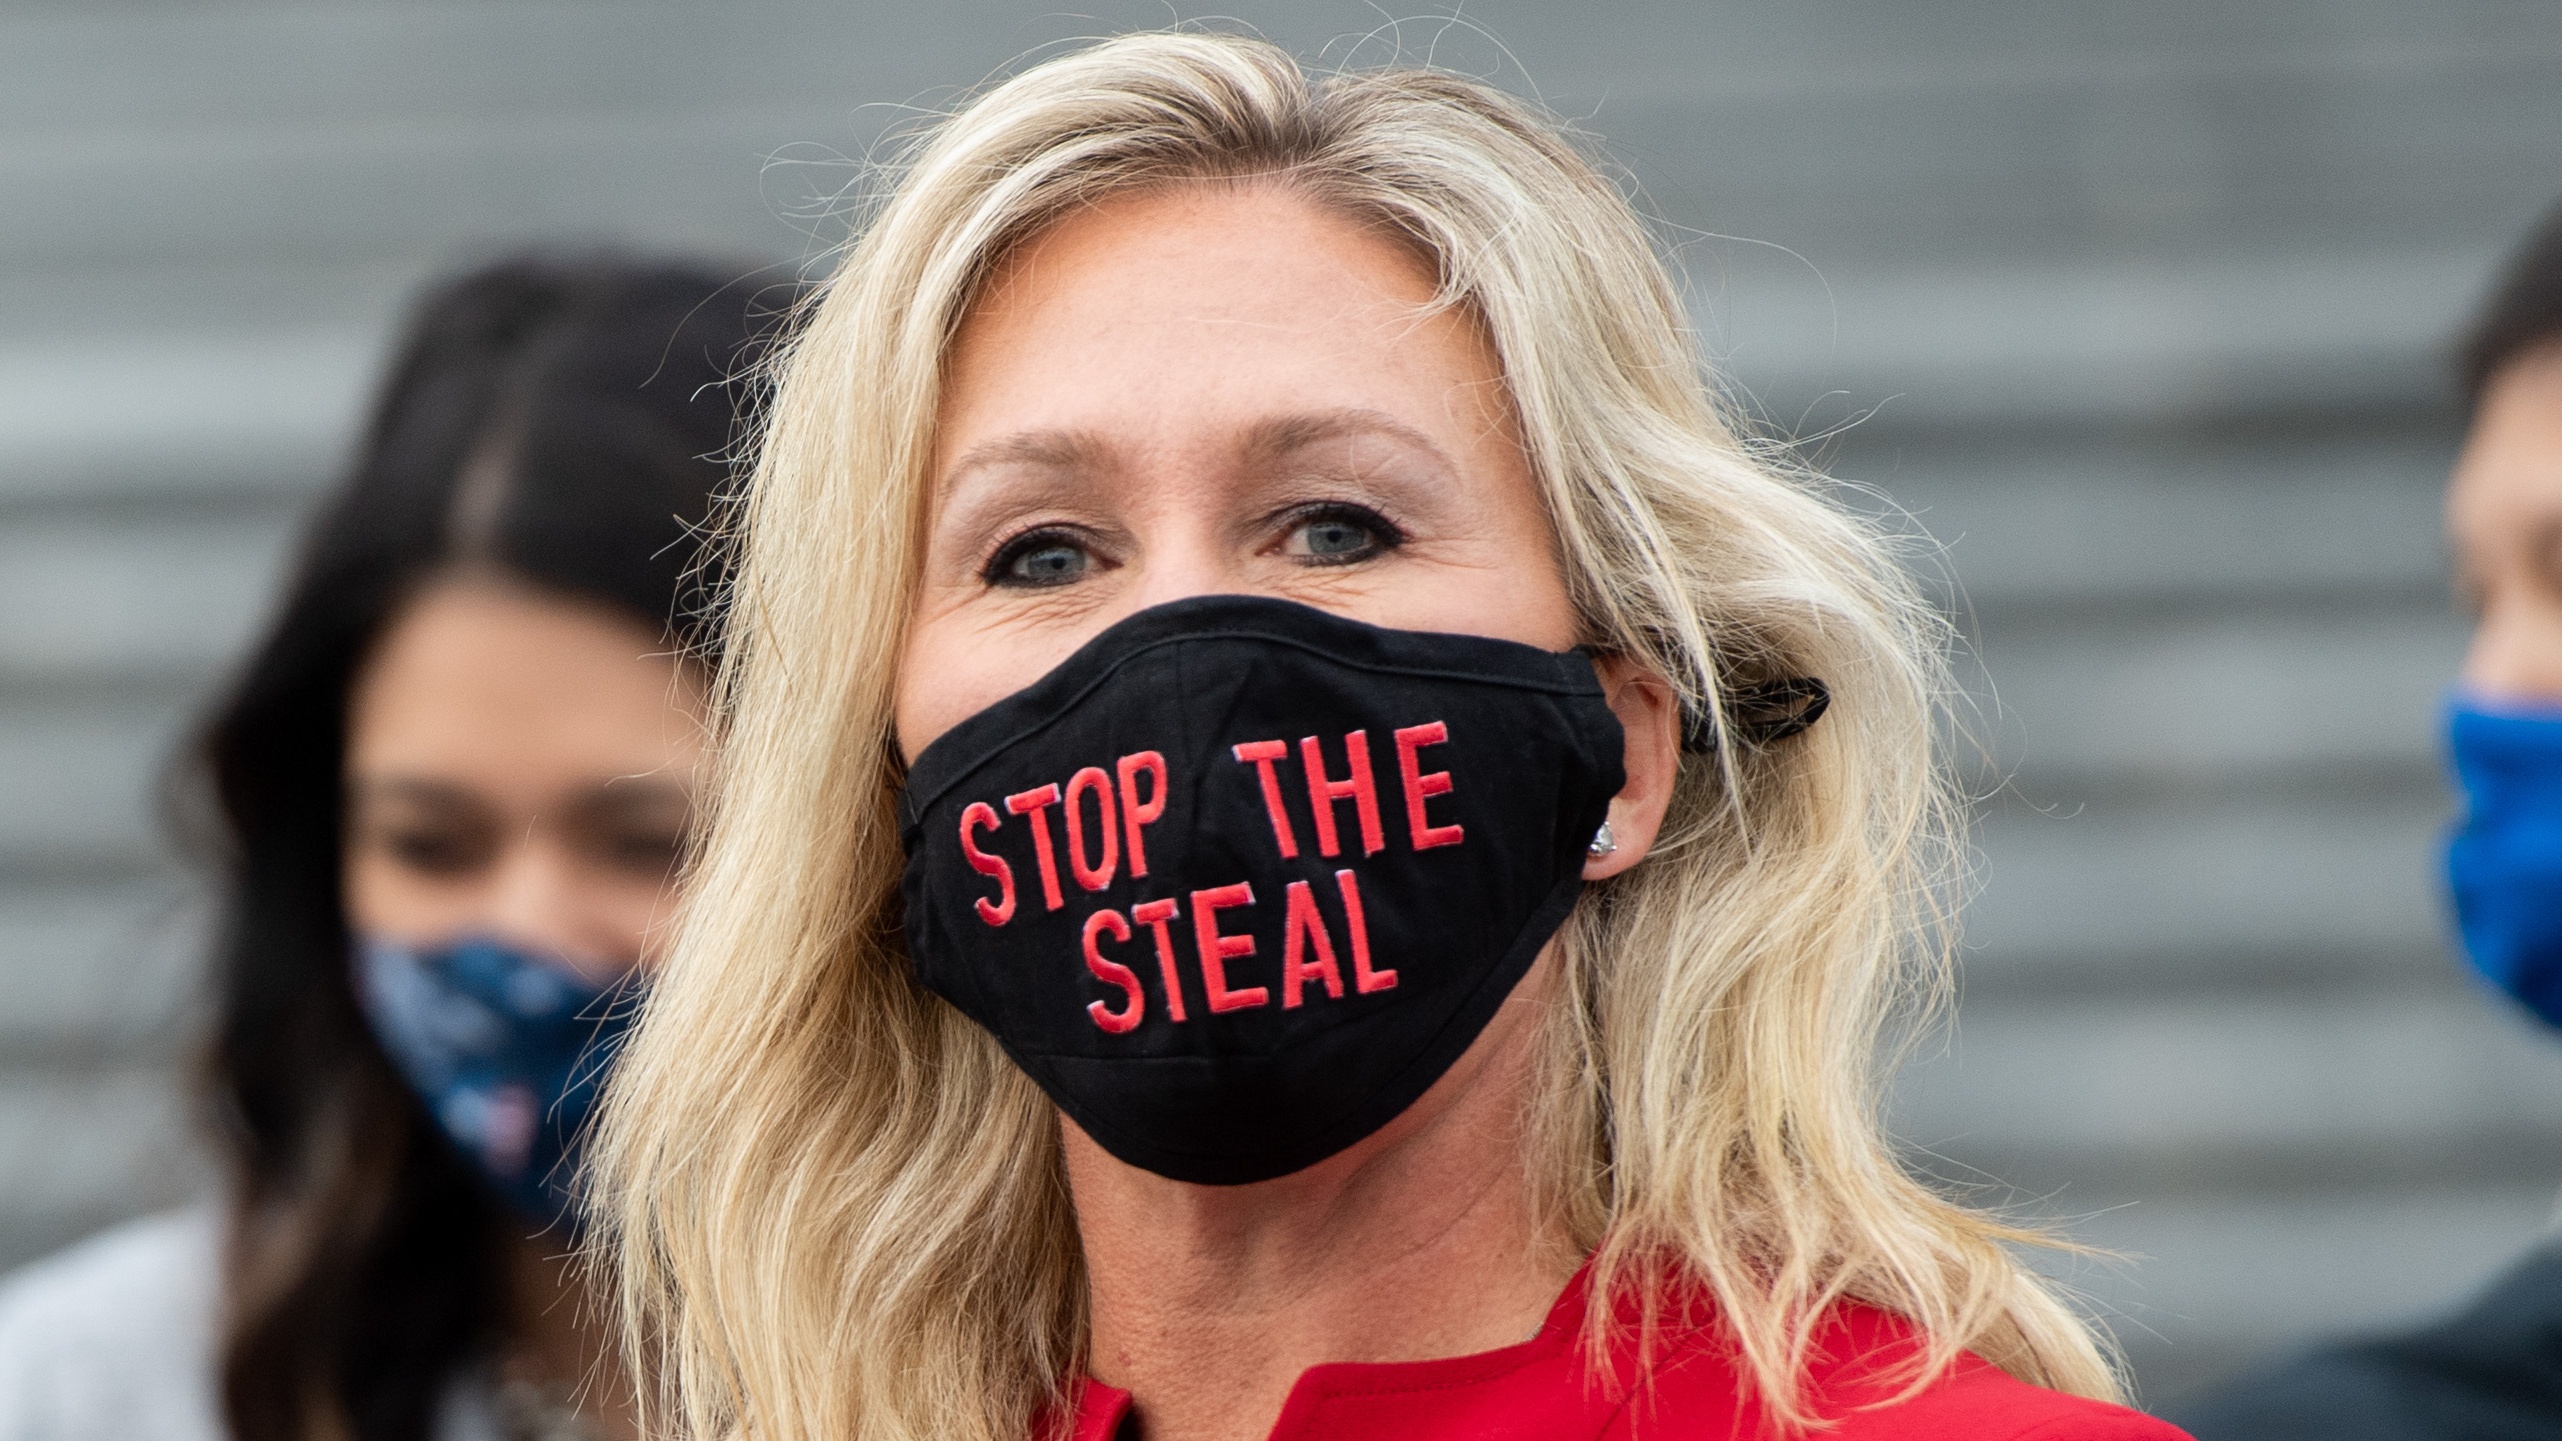 Marjorie Taylor Greene wearing a ‘stop the steal’ face mask, a slogan associated with baseless allegations of election fraud